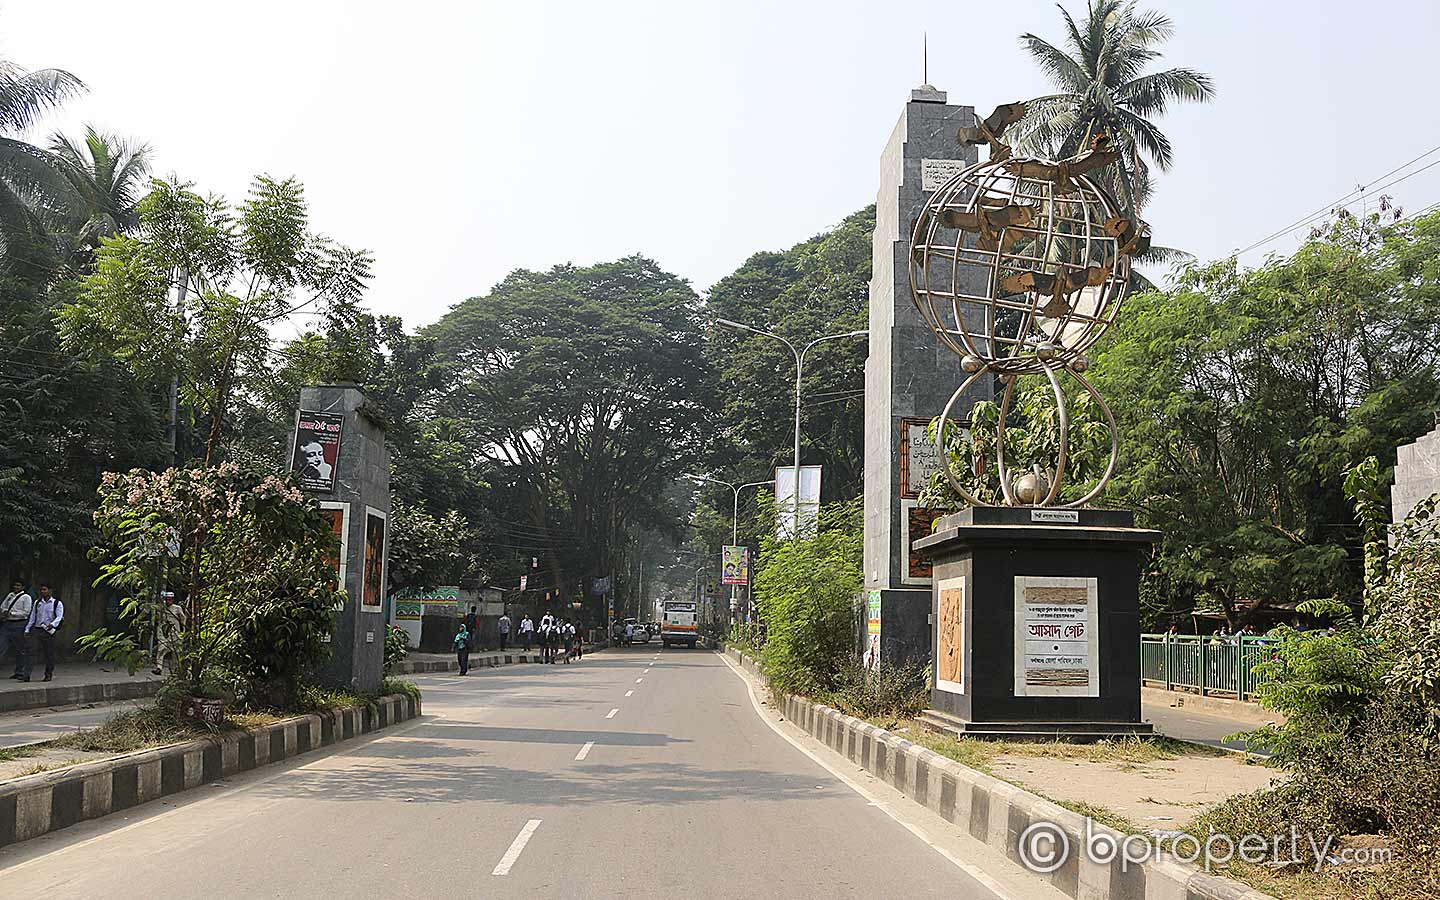 The asadgate area in Mohammadpur, Dhaka